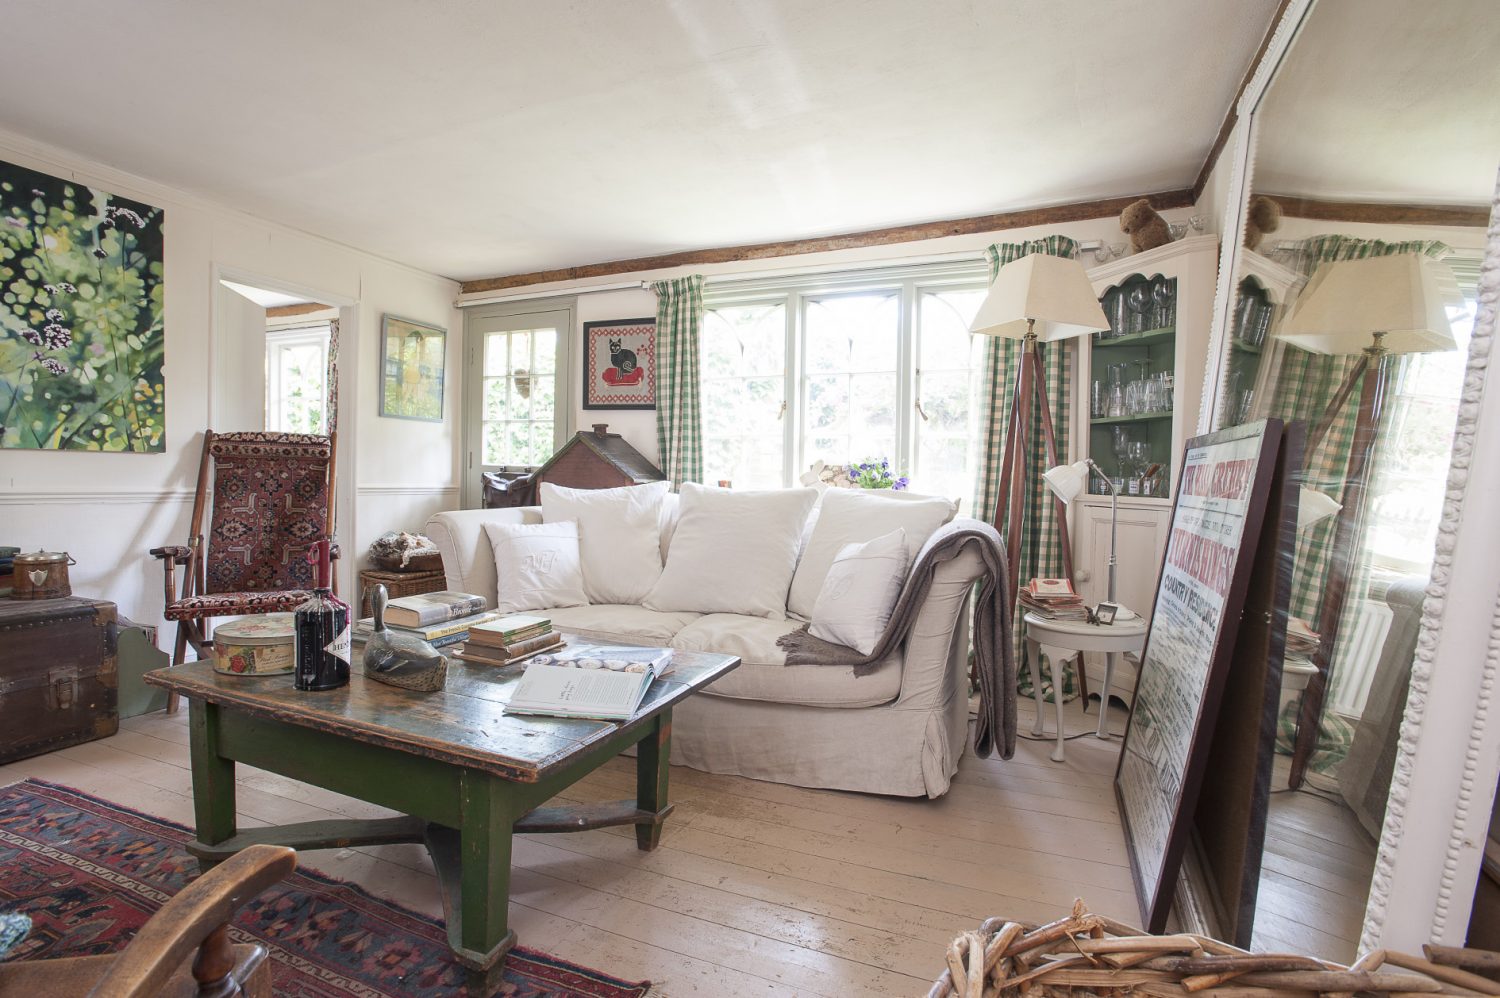 As the cottage is all on one level, the rooms are clustered closely together with the sitting room at the cente.